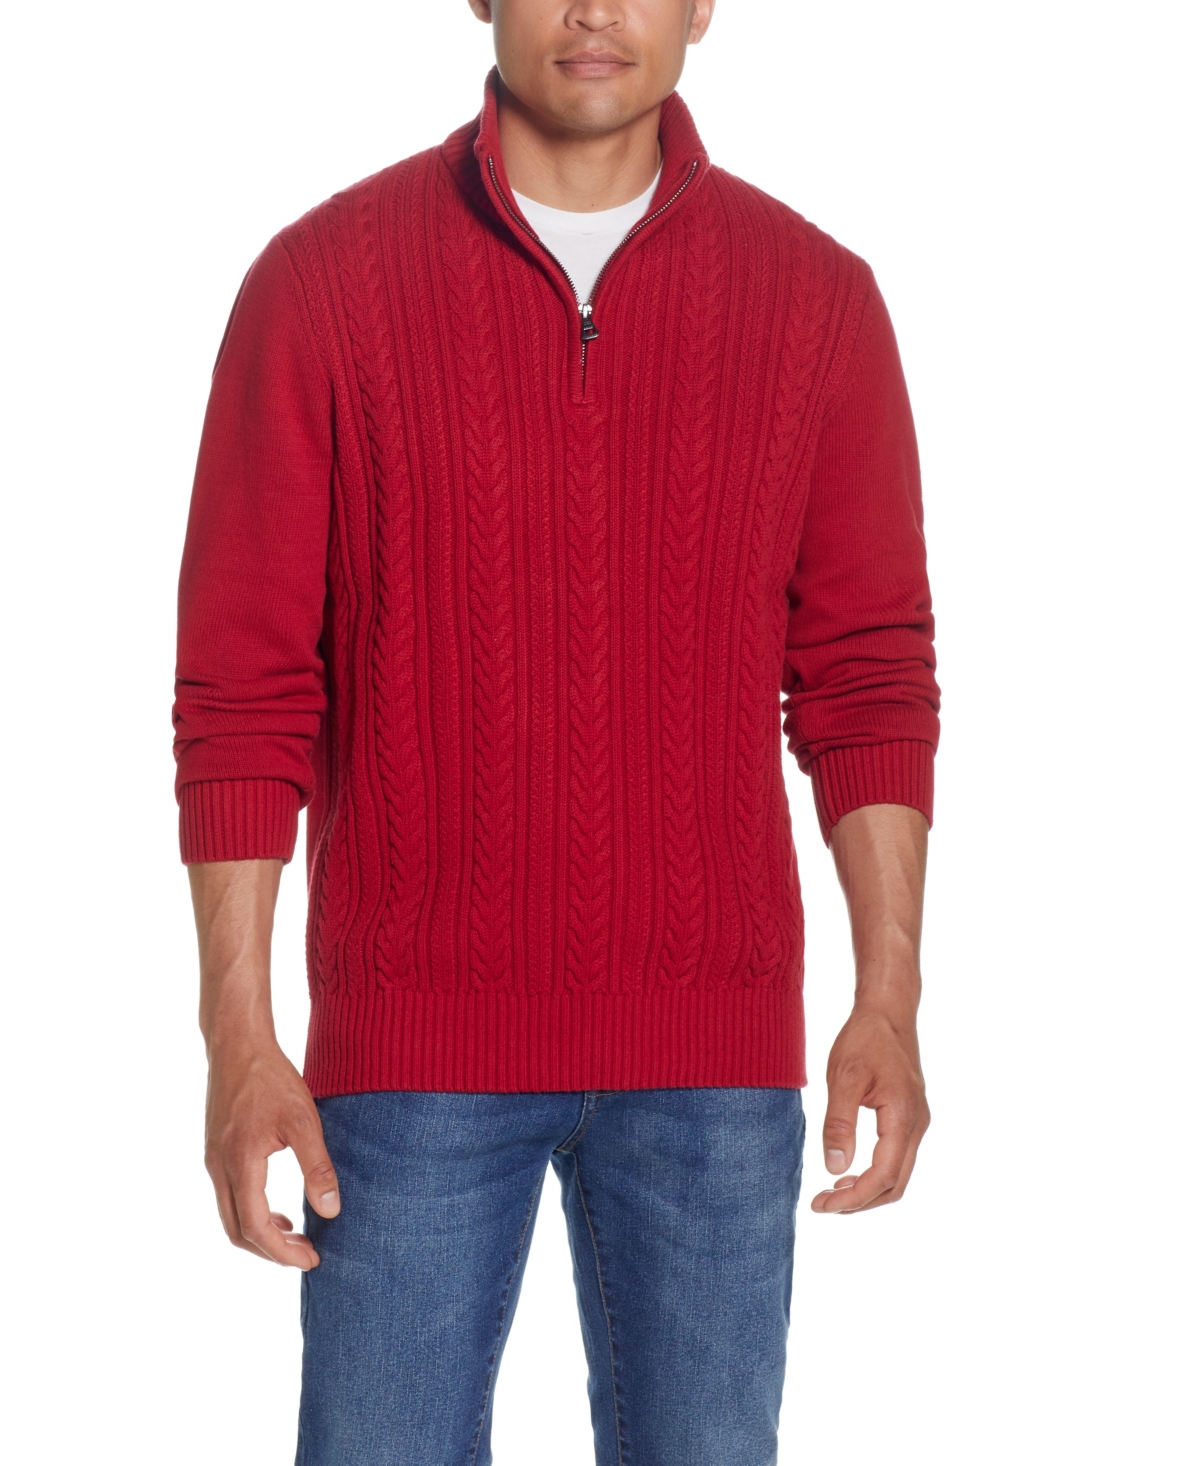 Men's Cable-Knit Quarter-Zip Sweater - Dark Red